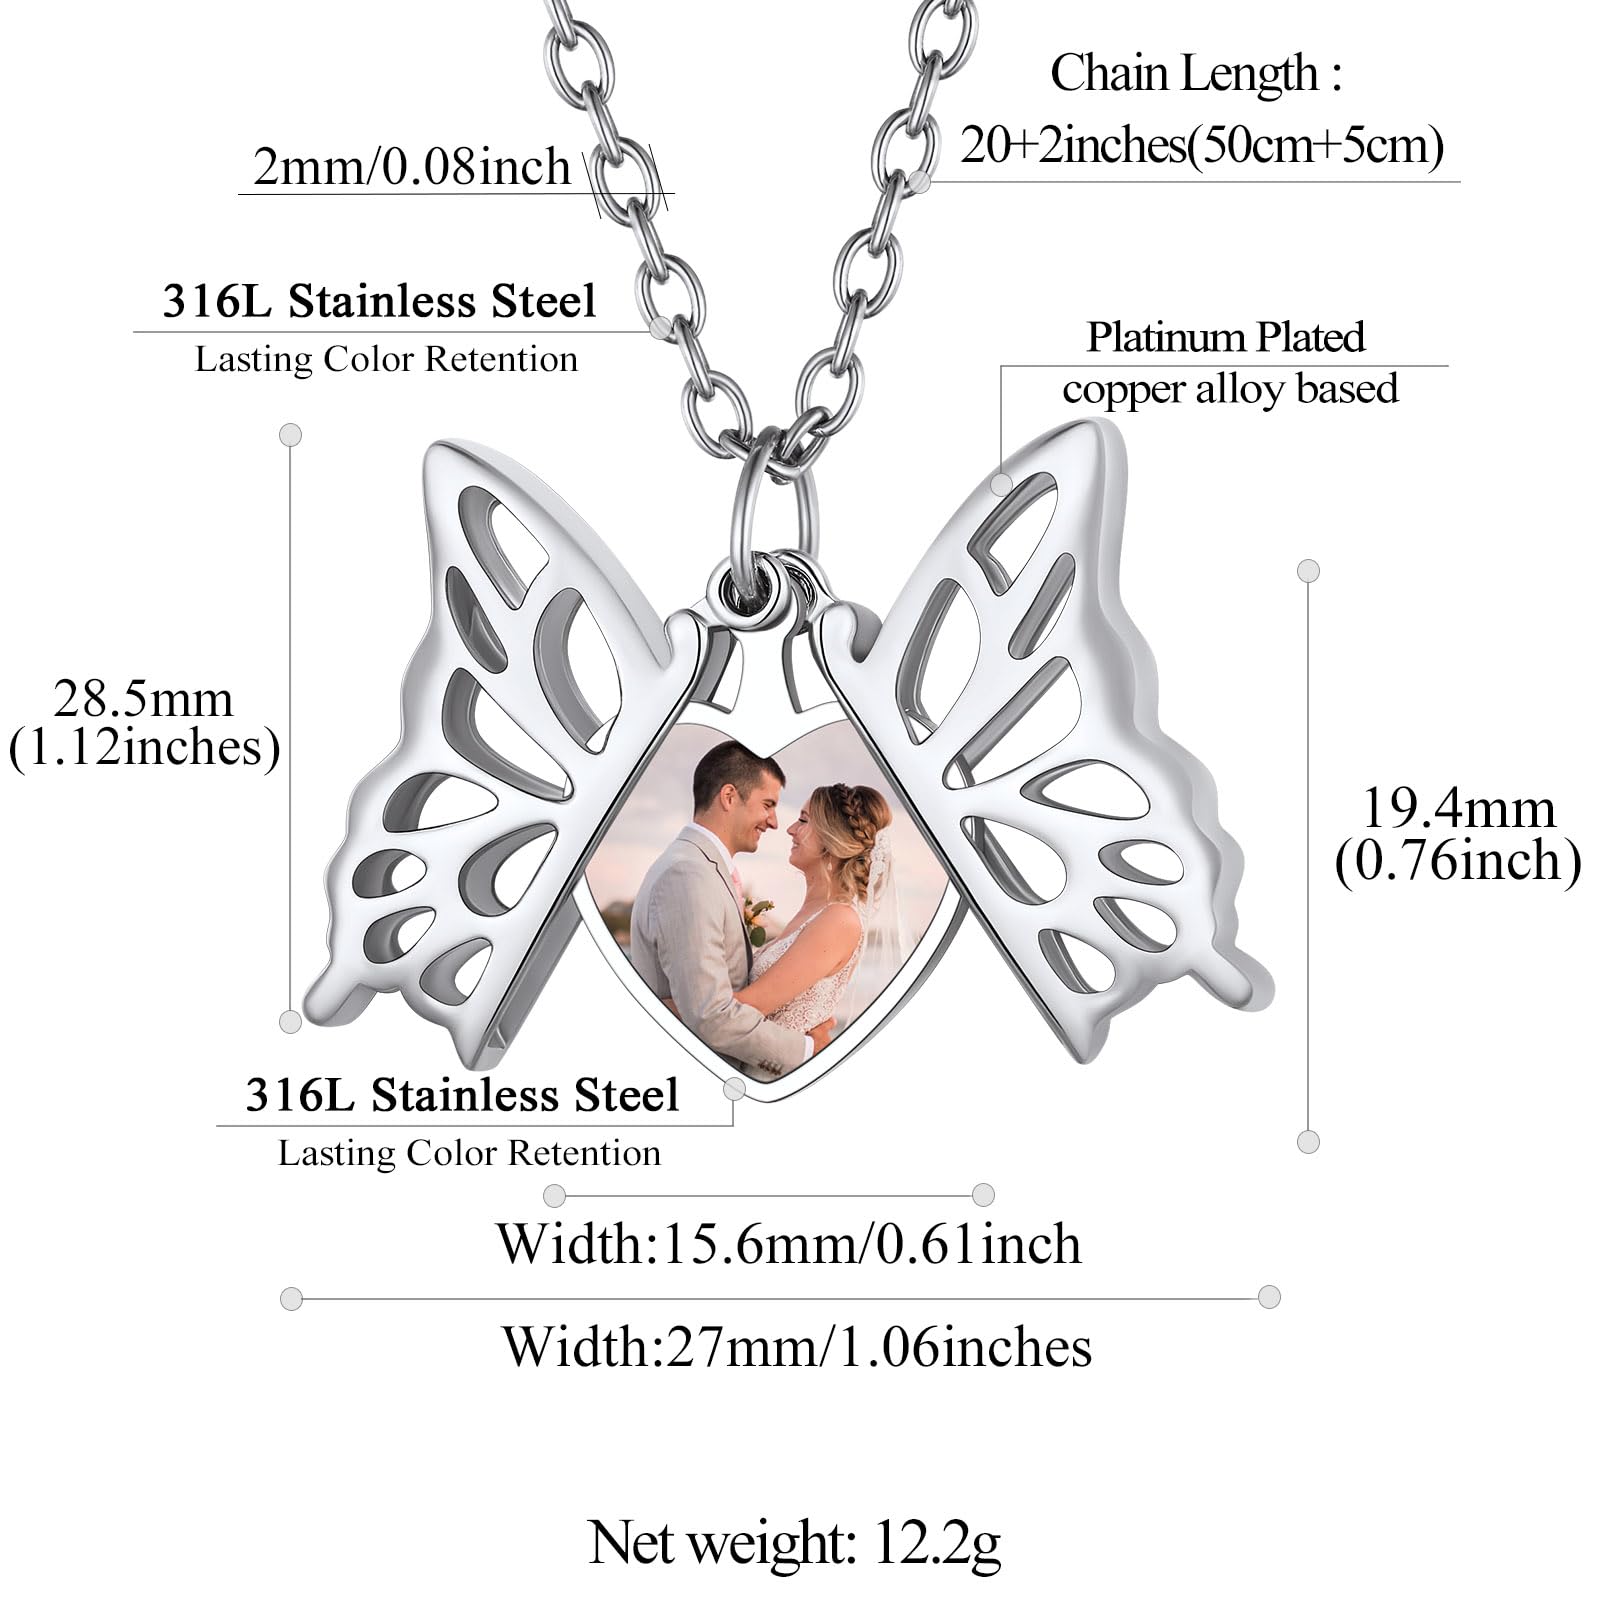 FindChic Personalized Heart Photo Angel Wings Locket Necklace Sterling Silver/Stainless Steel/18K Gold Plated Dainty Custom Full Color Picture Pendant Memorial Jewelry Gift for Girls Family + Gift Box